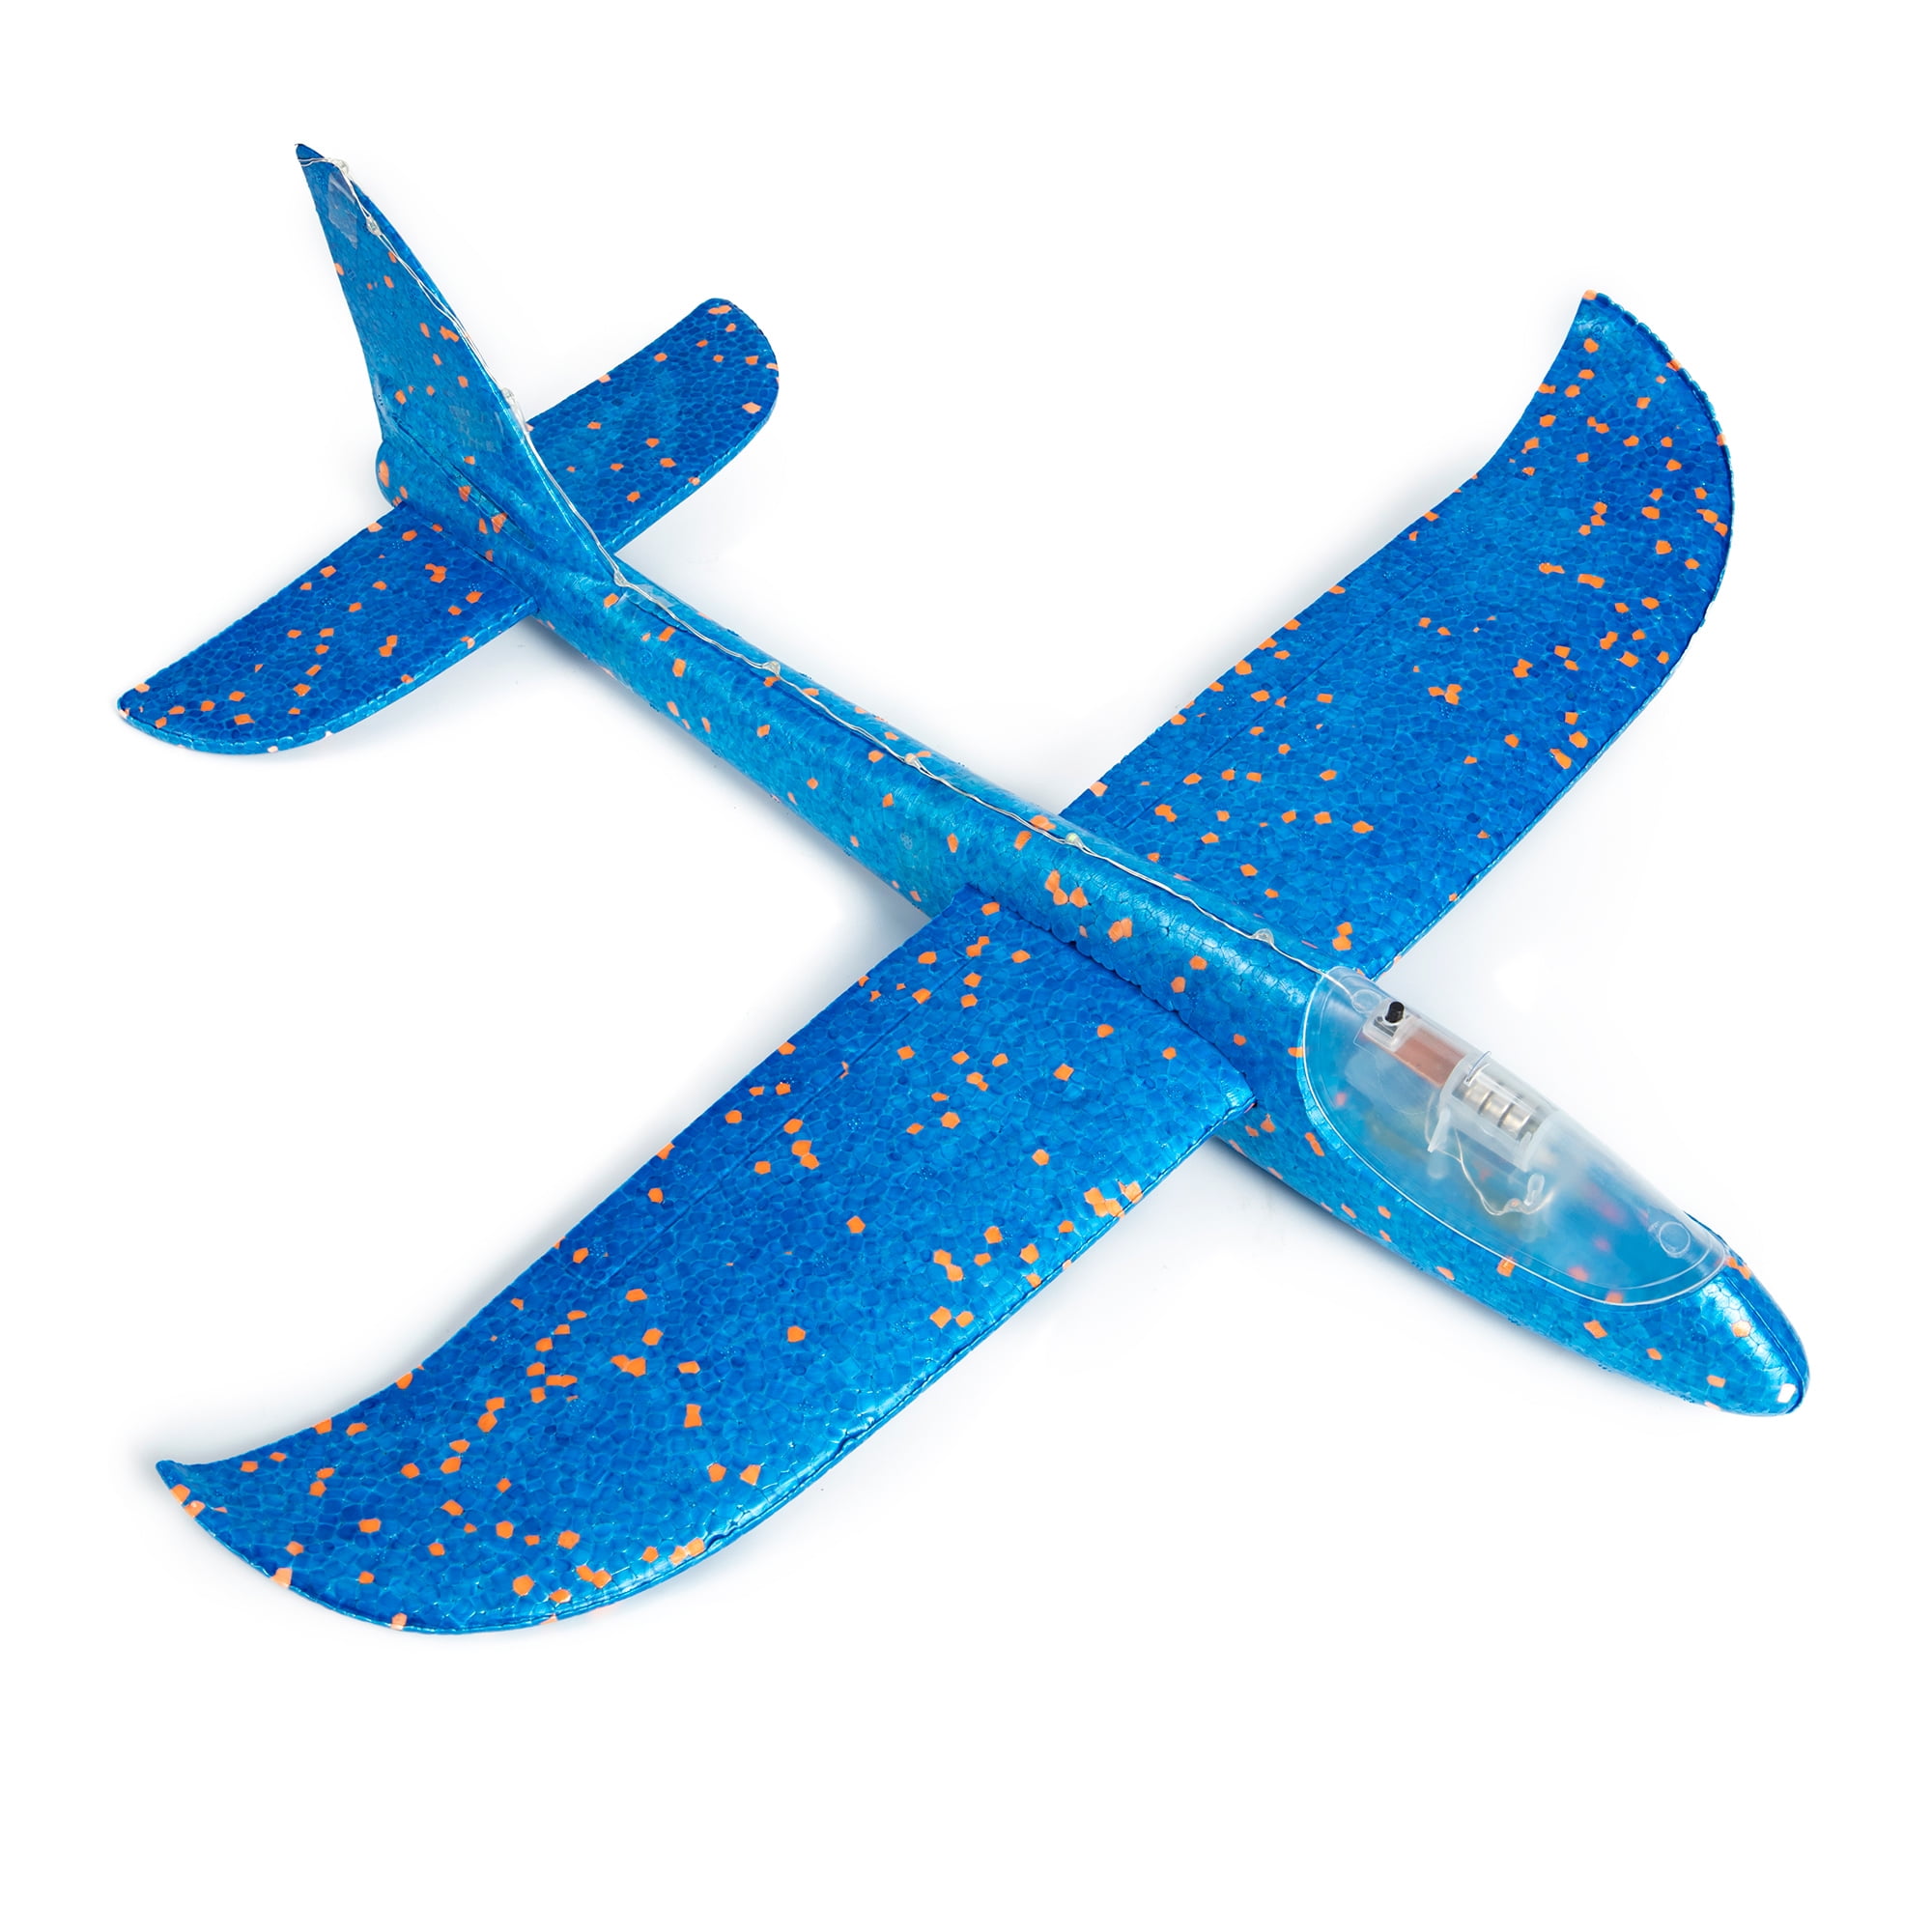 34 Soaring Airplane Crafts & Activities for Kids - Hands On As We Grow®